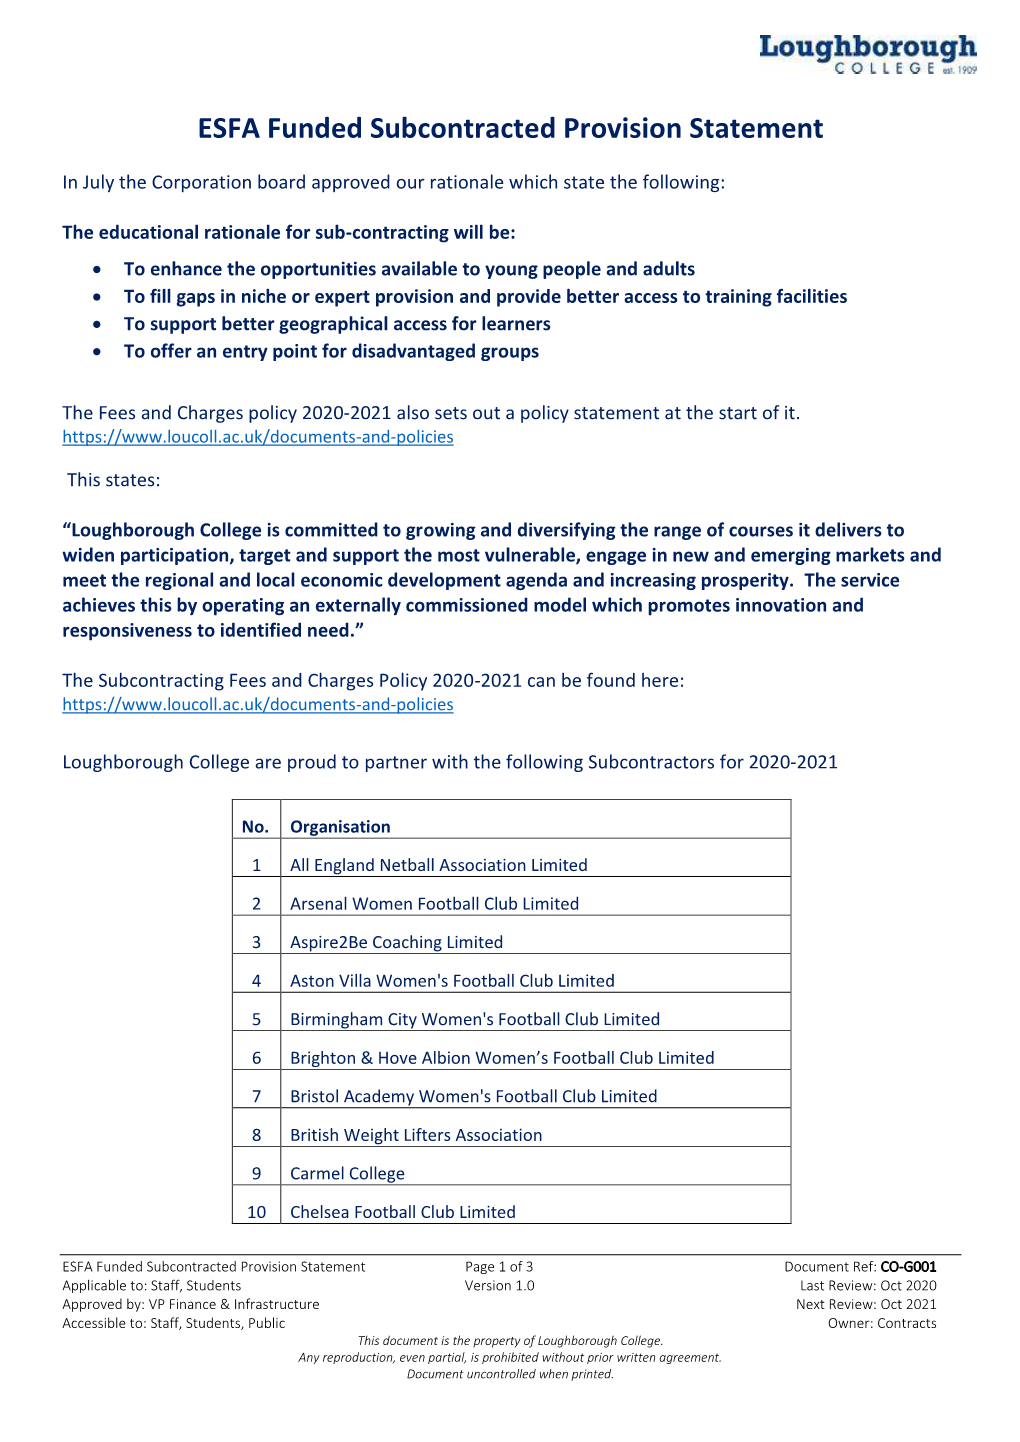 ESFA Funded Subcontracted Provision Statement